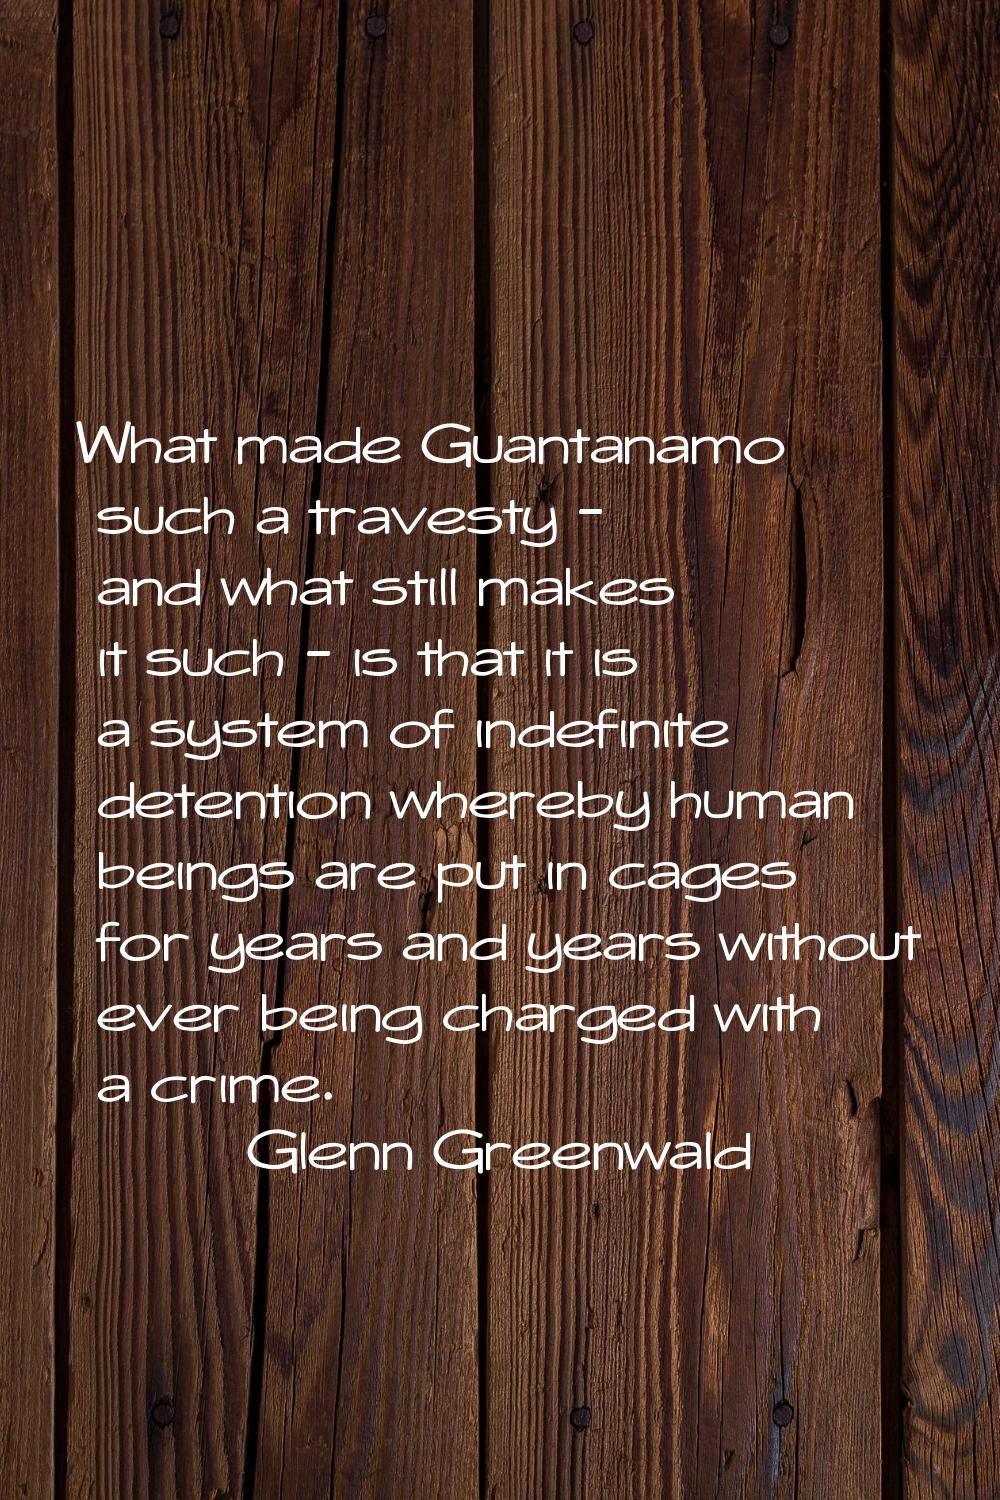 What made Guantanamo such a travesty - and what still makes it such - is that it is a system of ind